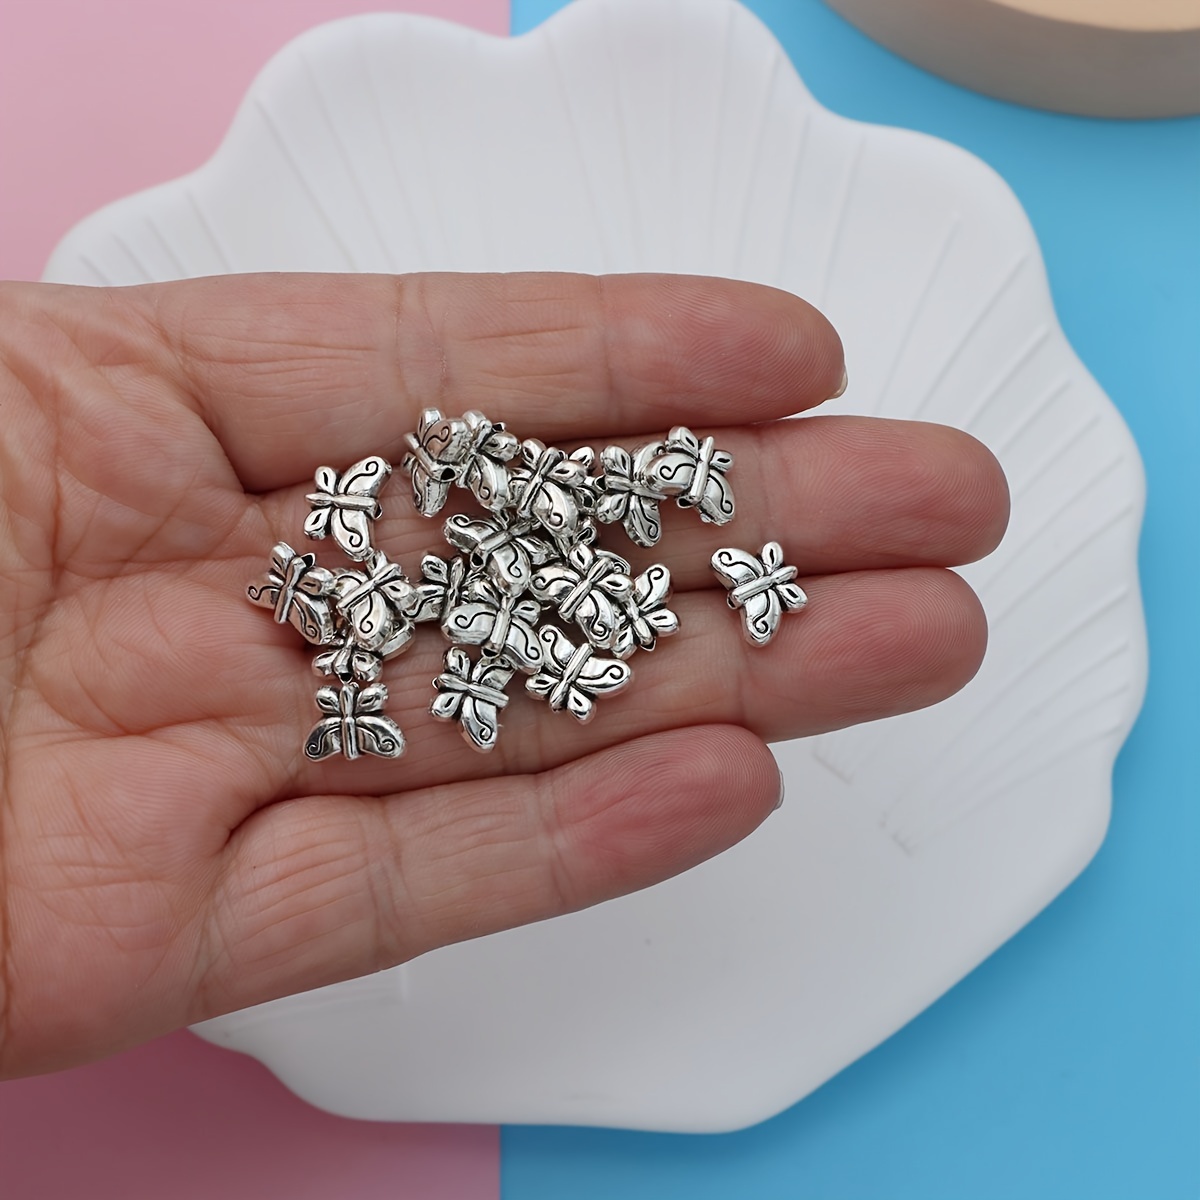 10pcs 11x12mm Antique Silver Plated Elegant Butterfly Loose Spacer Beads  Charm Necklace Diy Bead Jewelry Accessories Hole Fit 1mm Cord